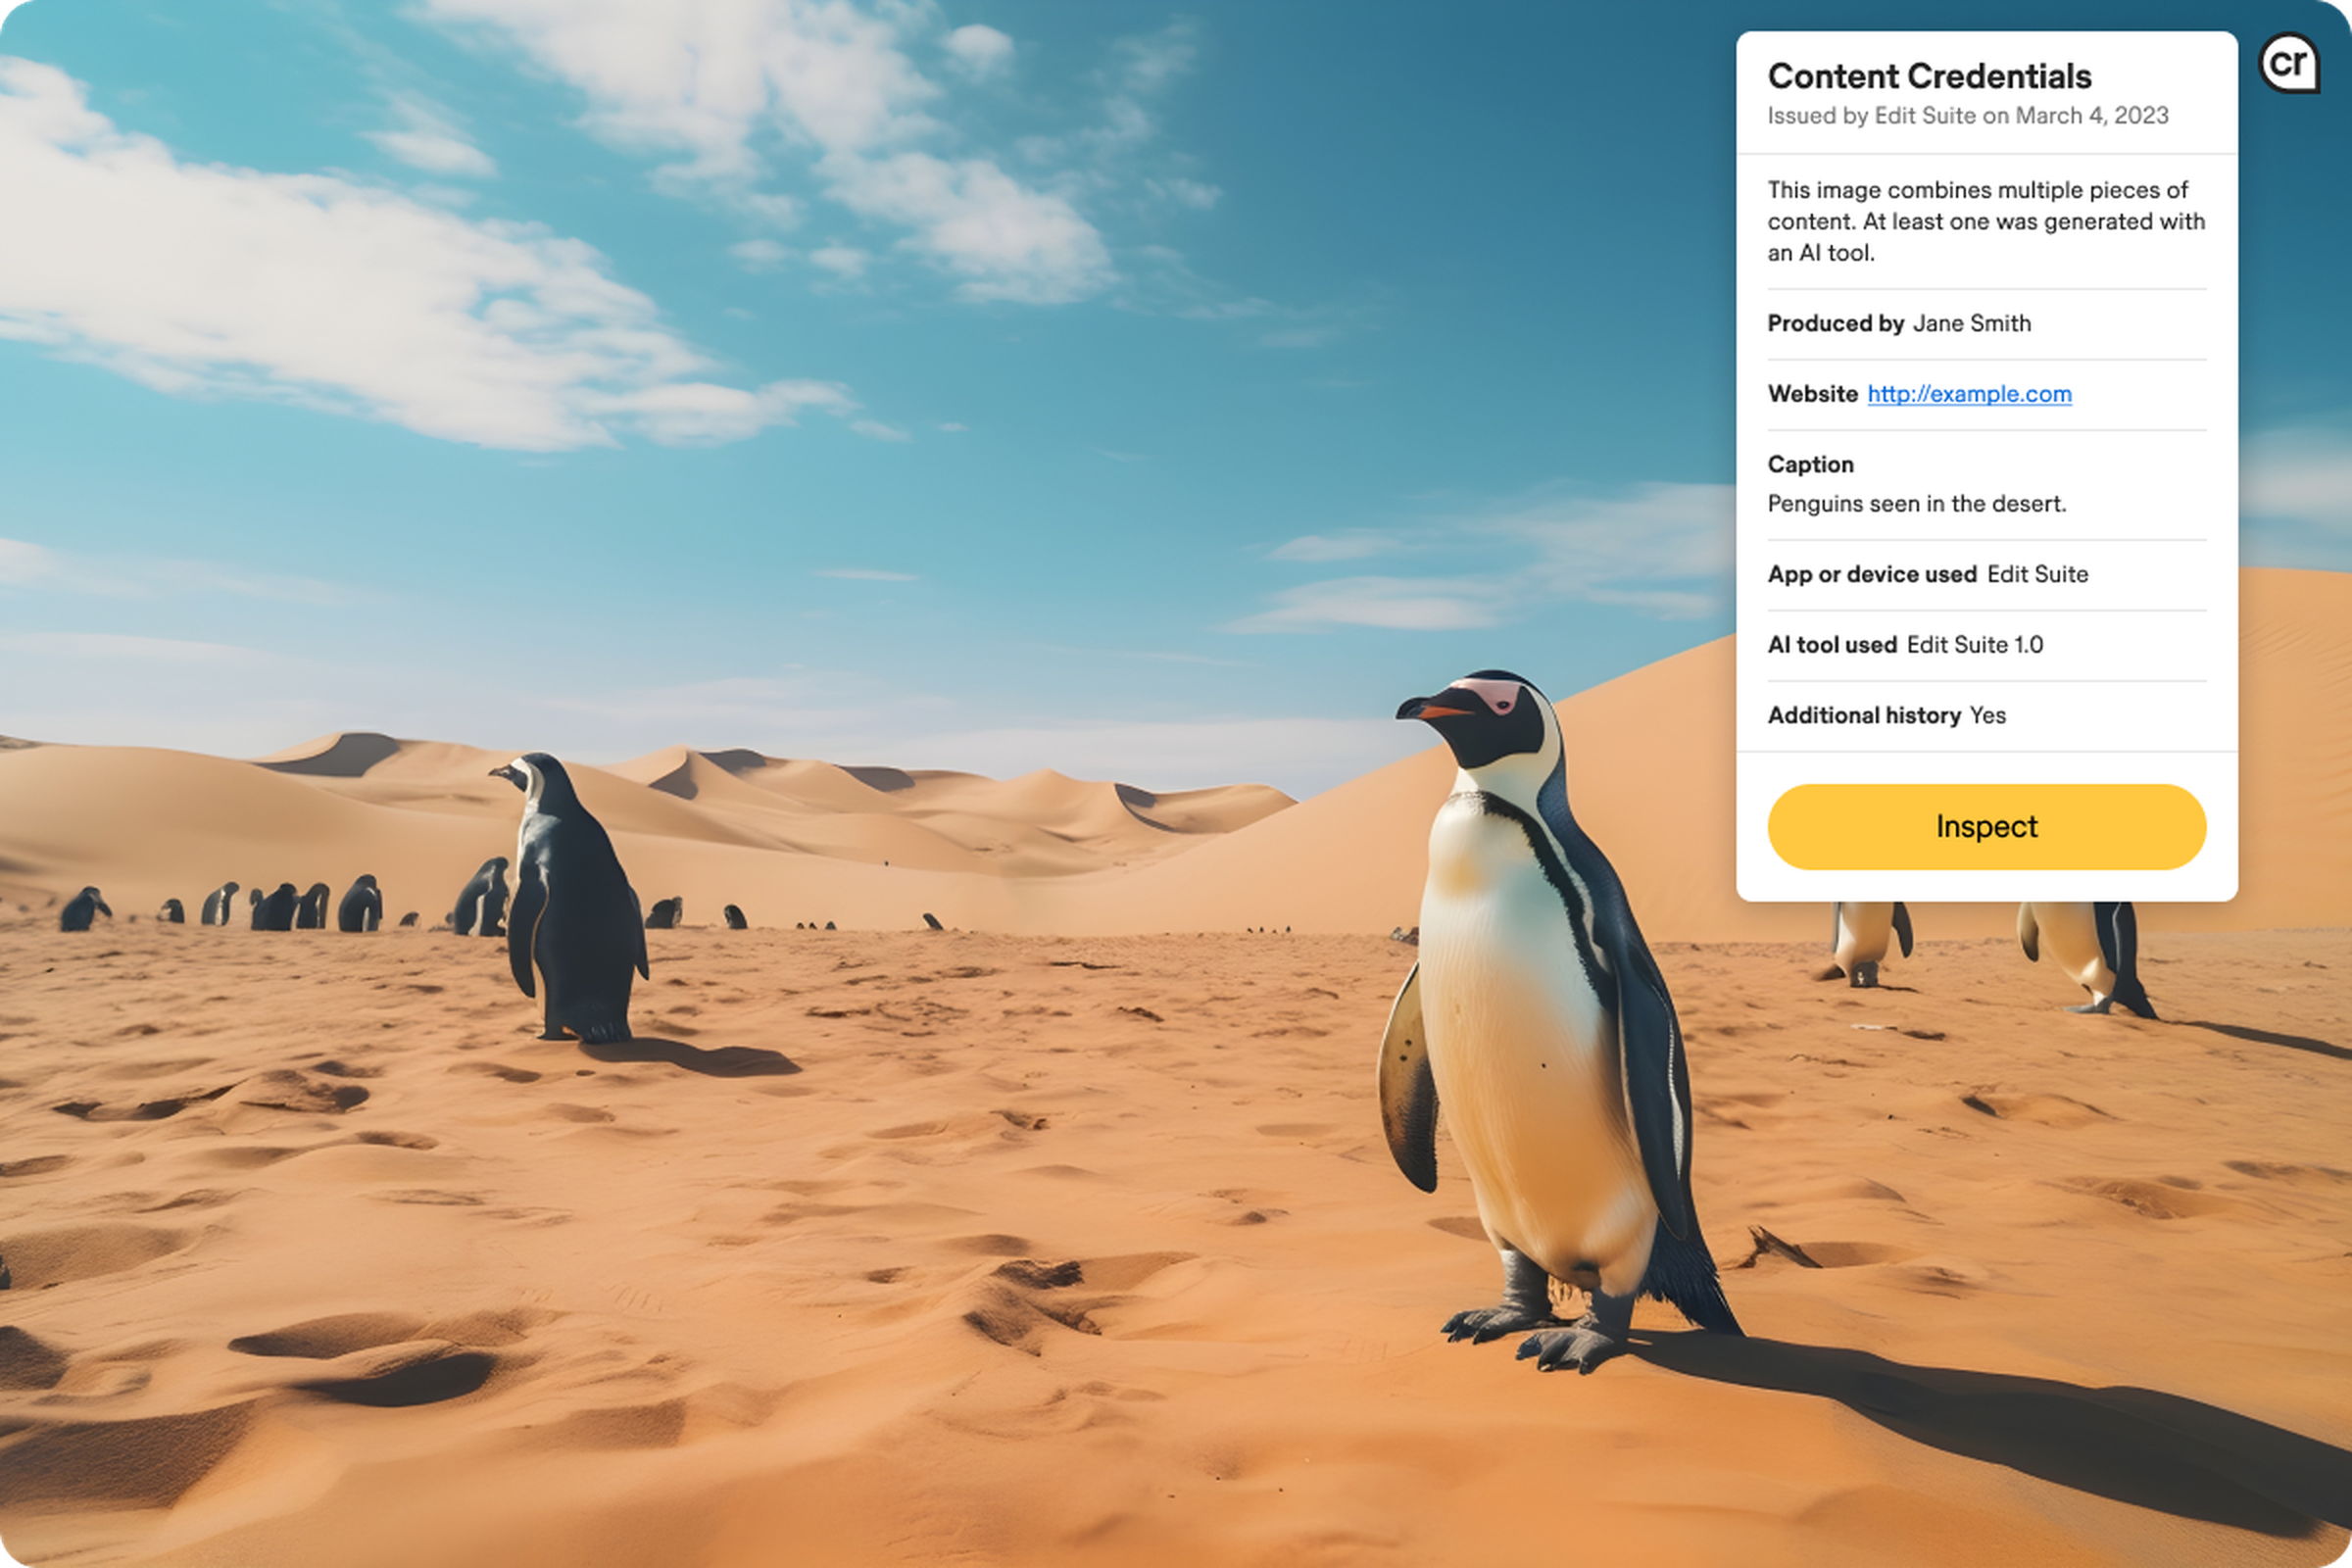 An image of penguins in a desert, with content credentials attributed.